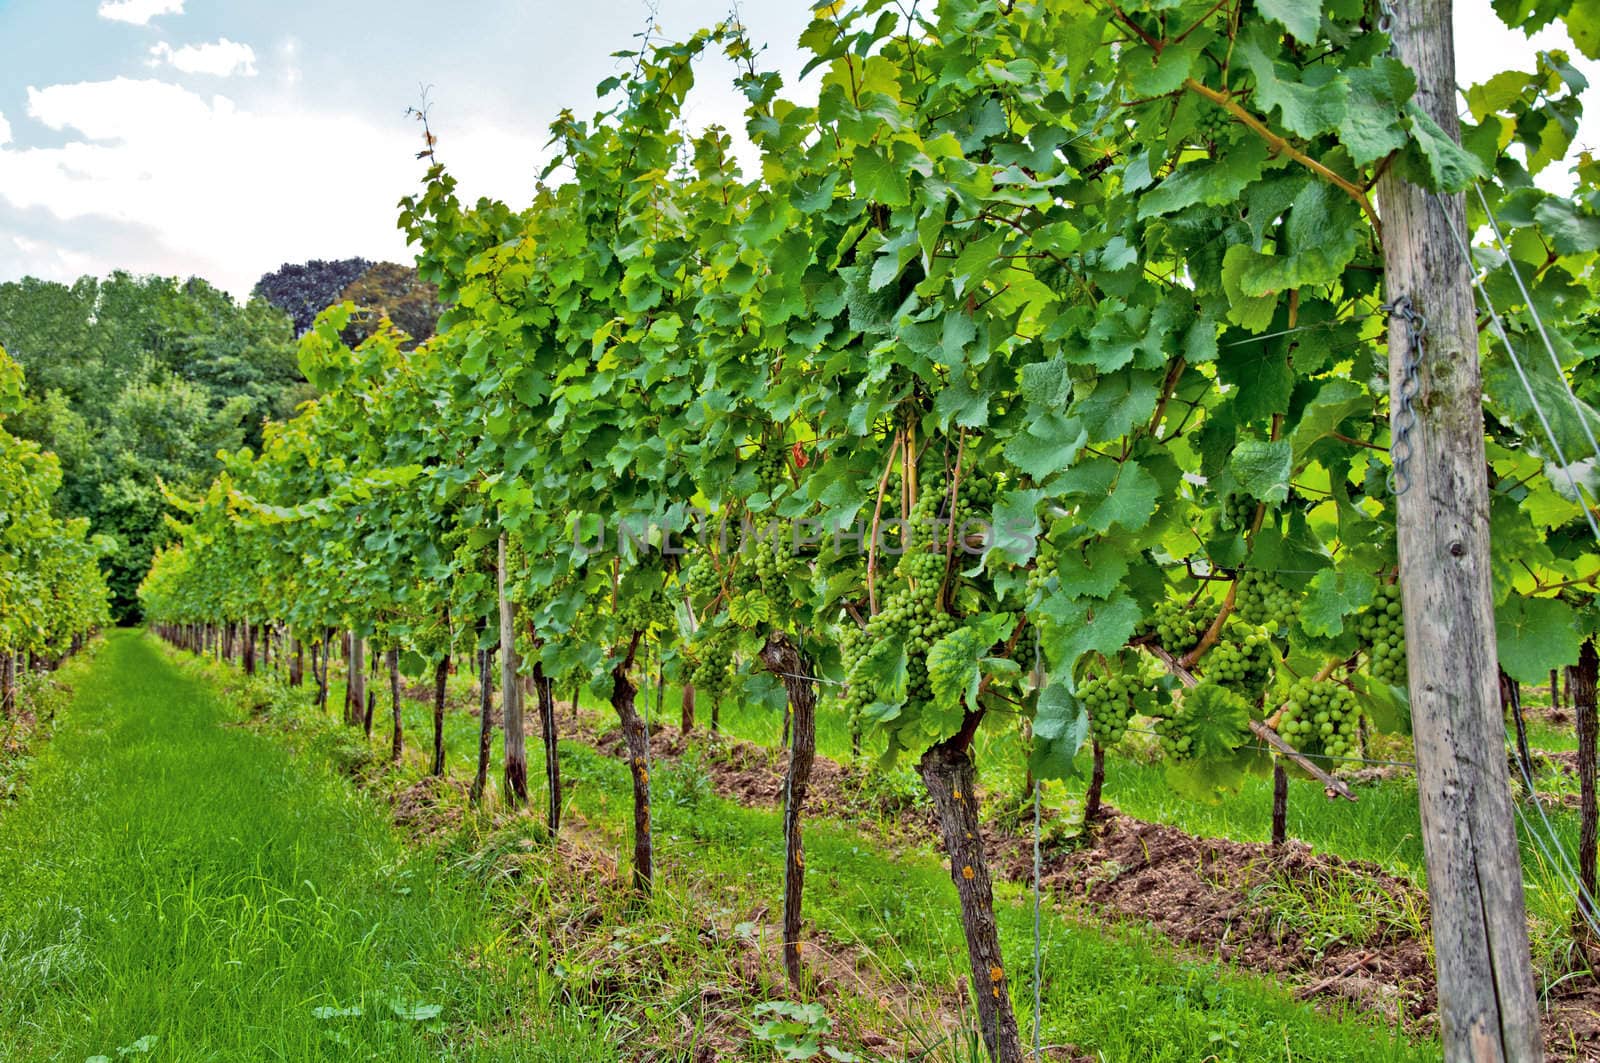 Vineyard in the heart of the small town in Germany